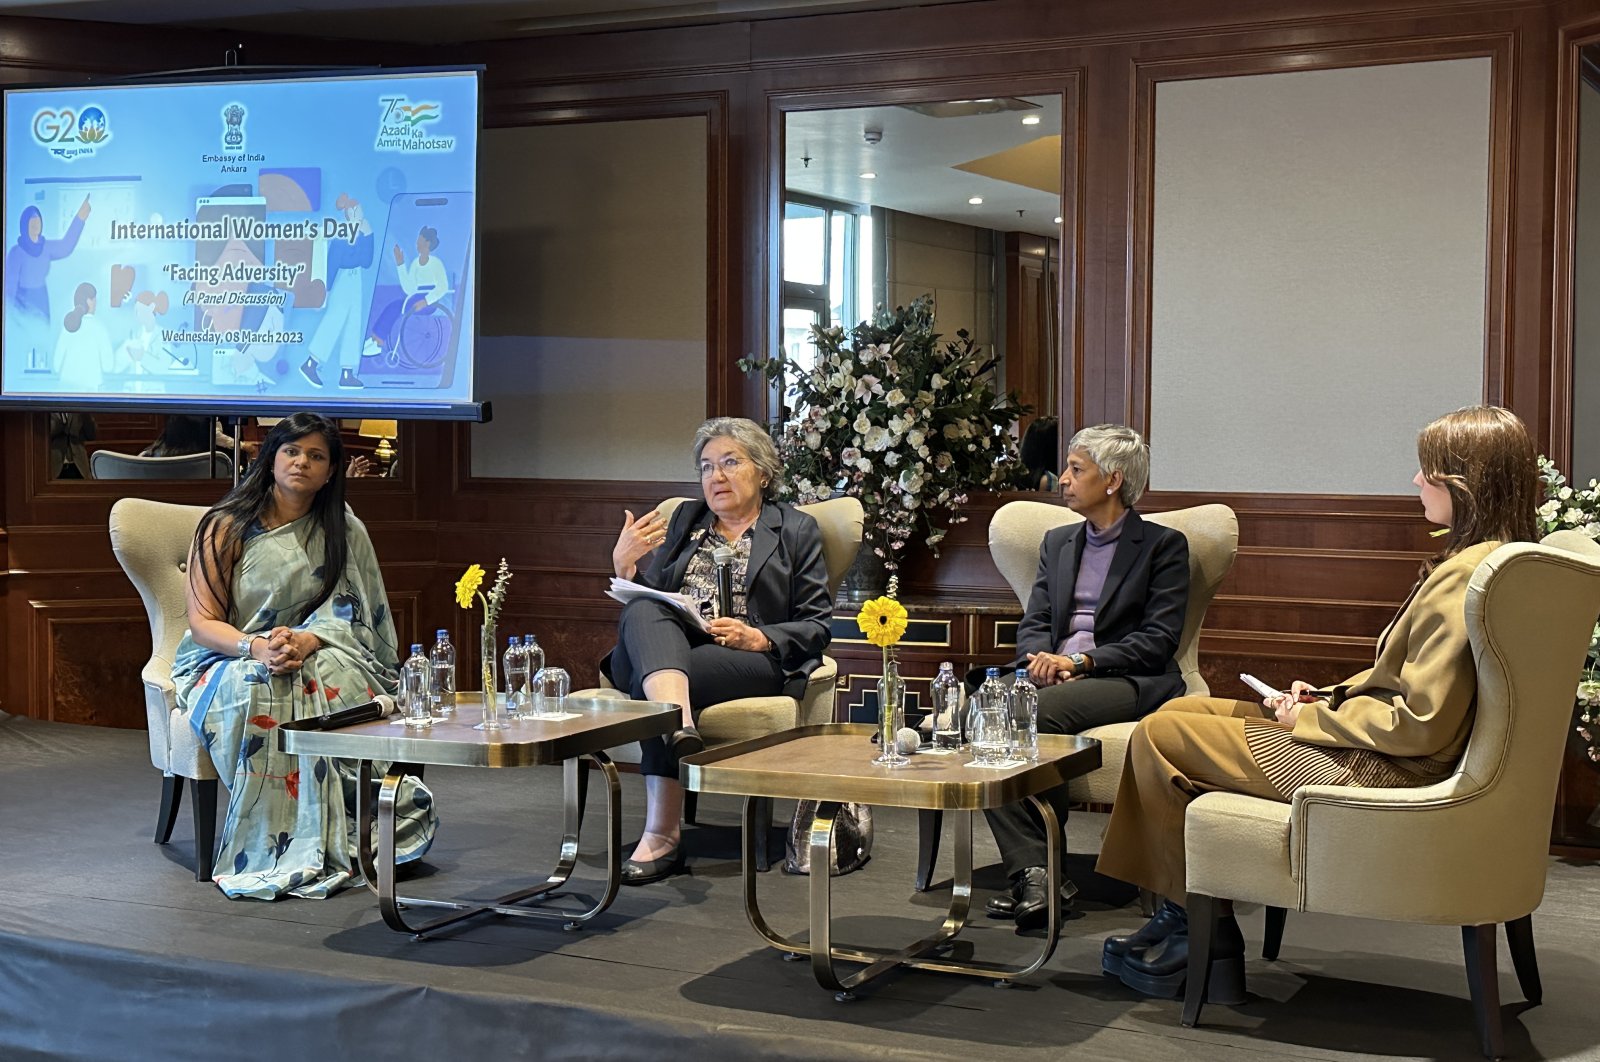 Women's resilience highlighted at Indian Embassy panel on Int'l Women's Day